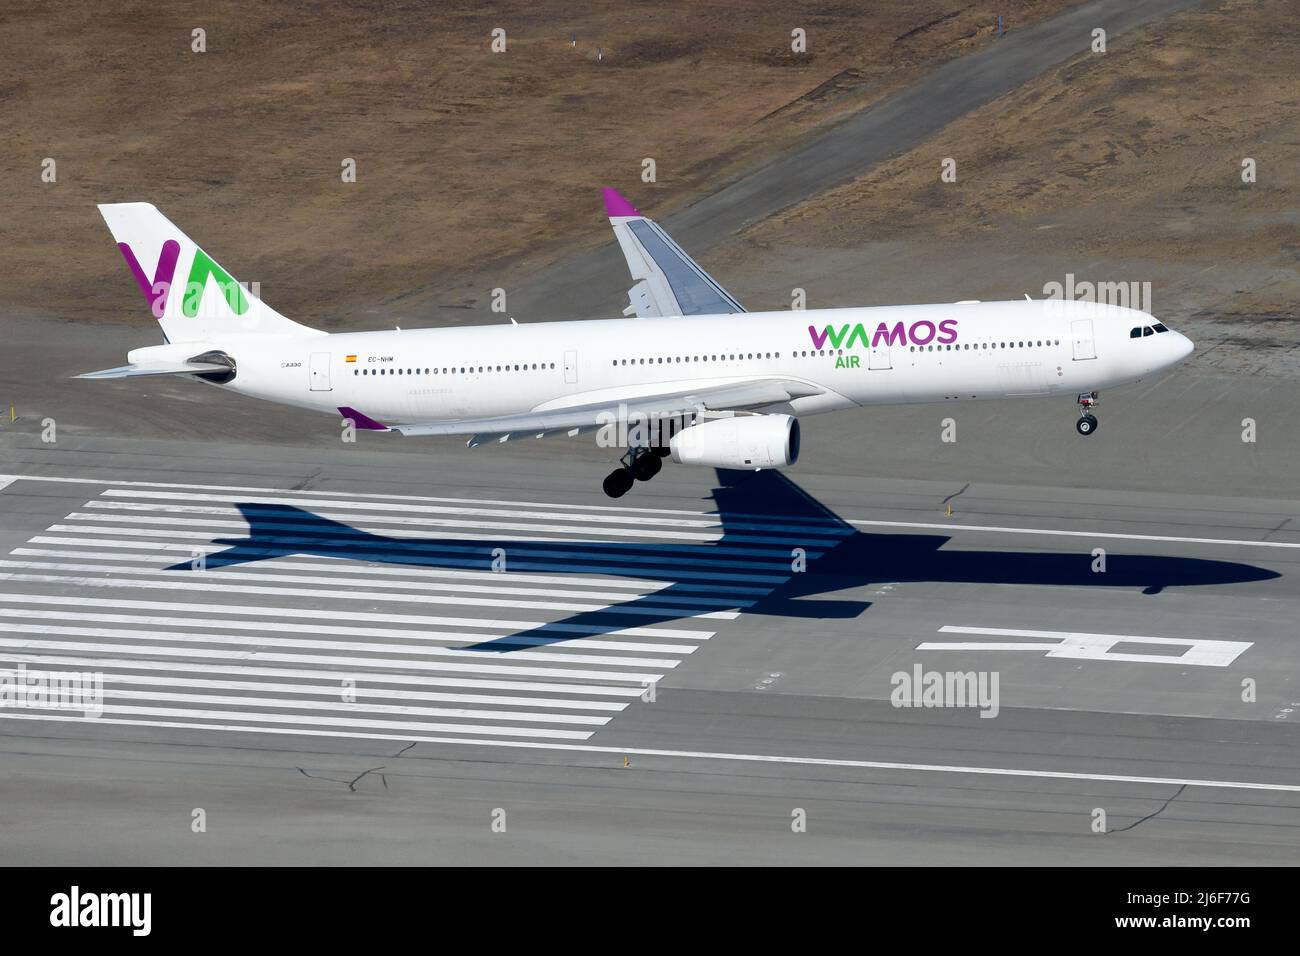 Wamos Air Airbus A330-300 airplane landing. Aircraft A330 of charter airline WamosAir. Plane registered as EC-NHM. Stock Photo